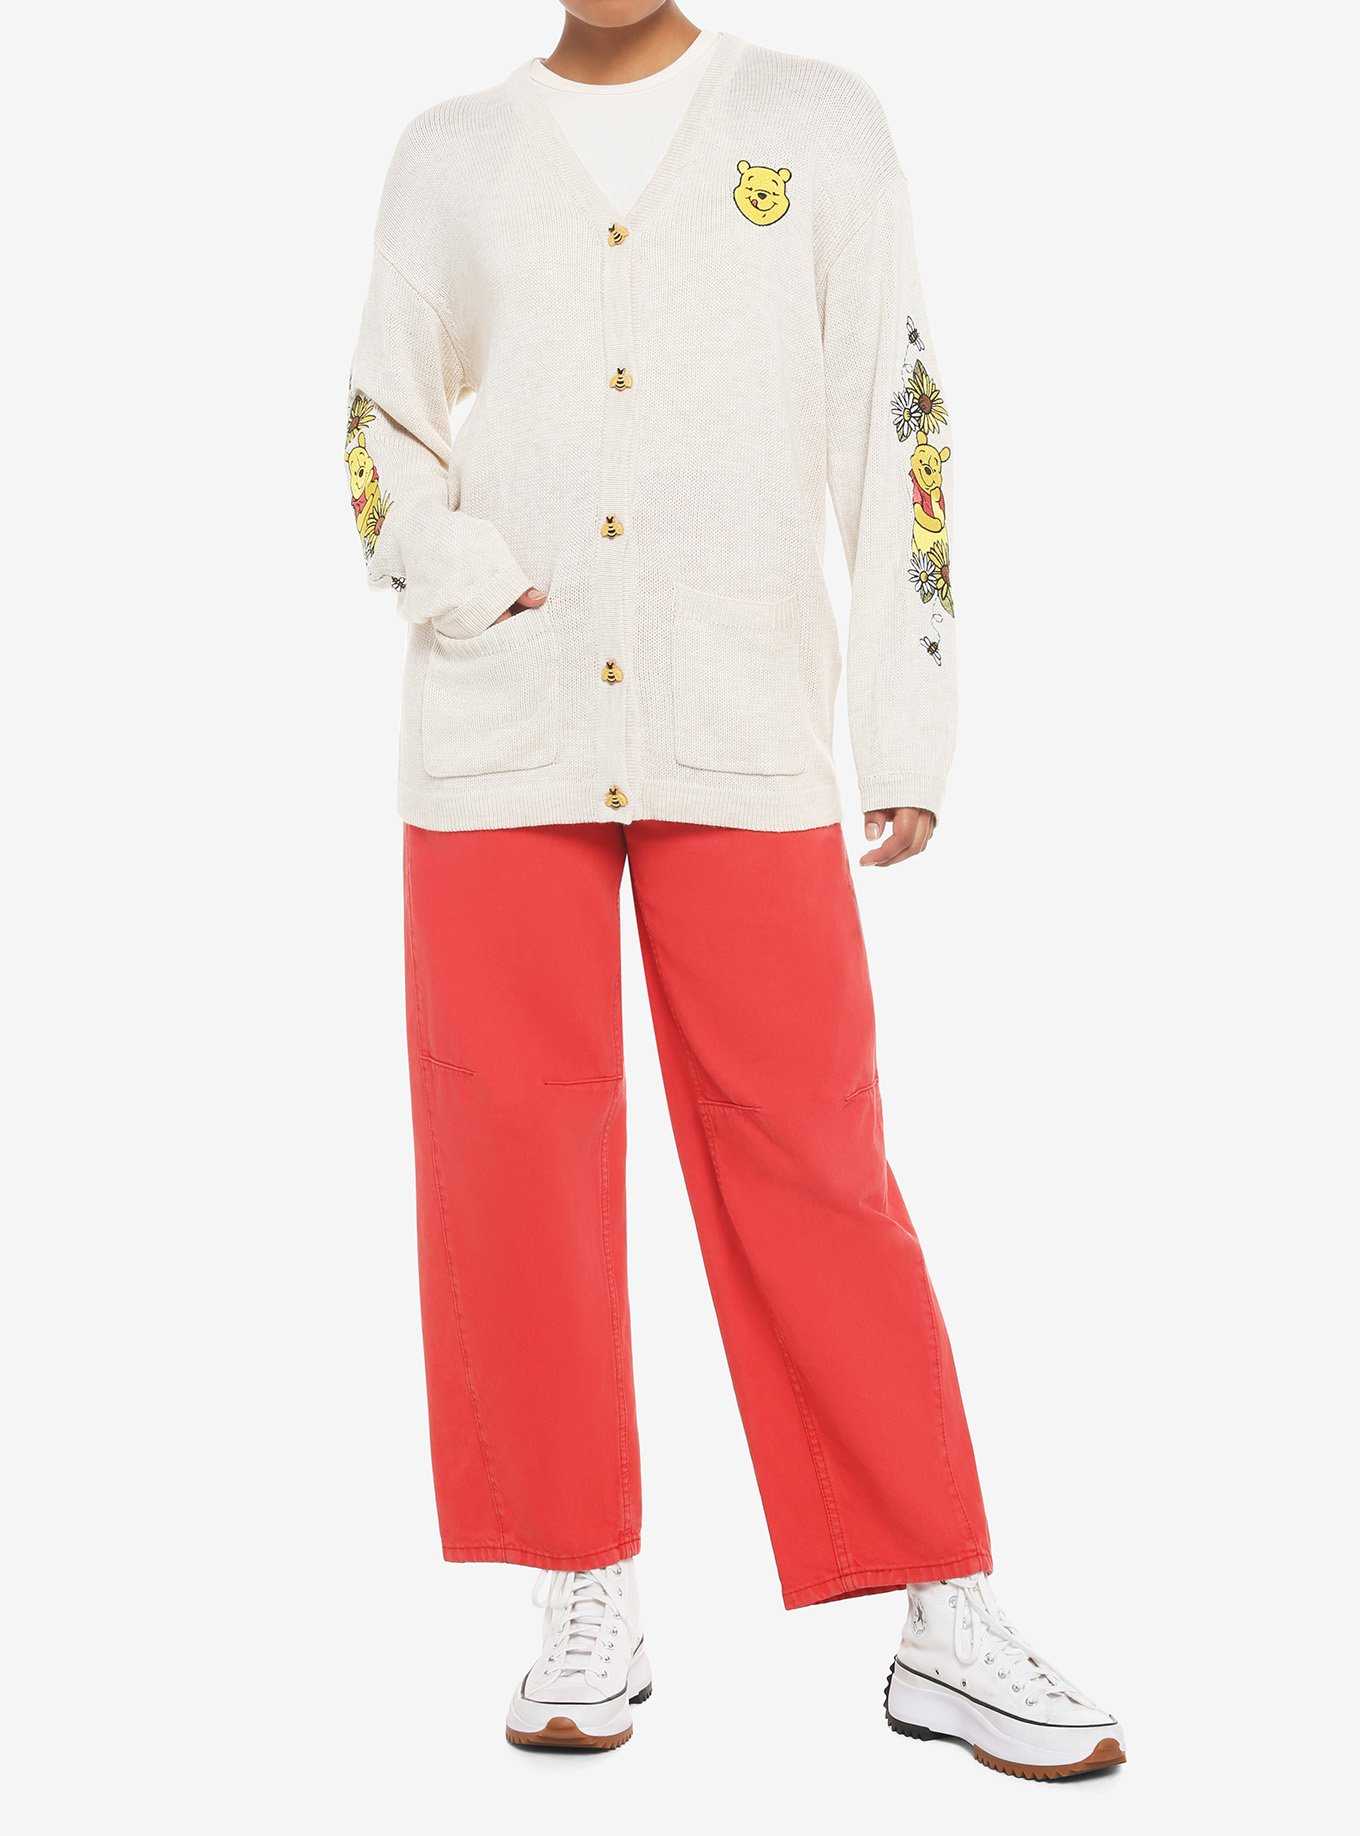 Disney Winnie The Pooh Embroidered Oversized Cardigan, , hi-res